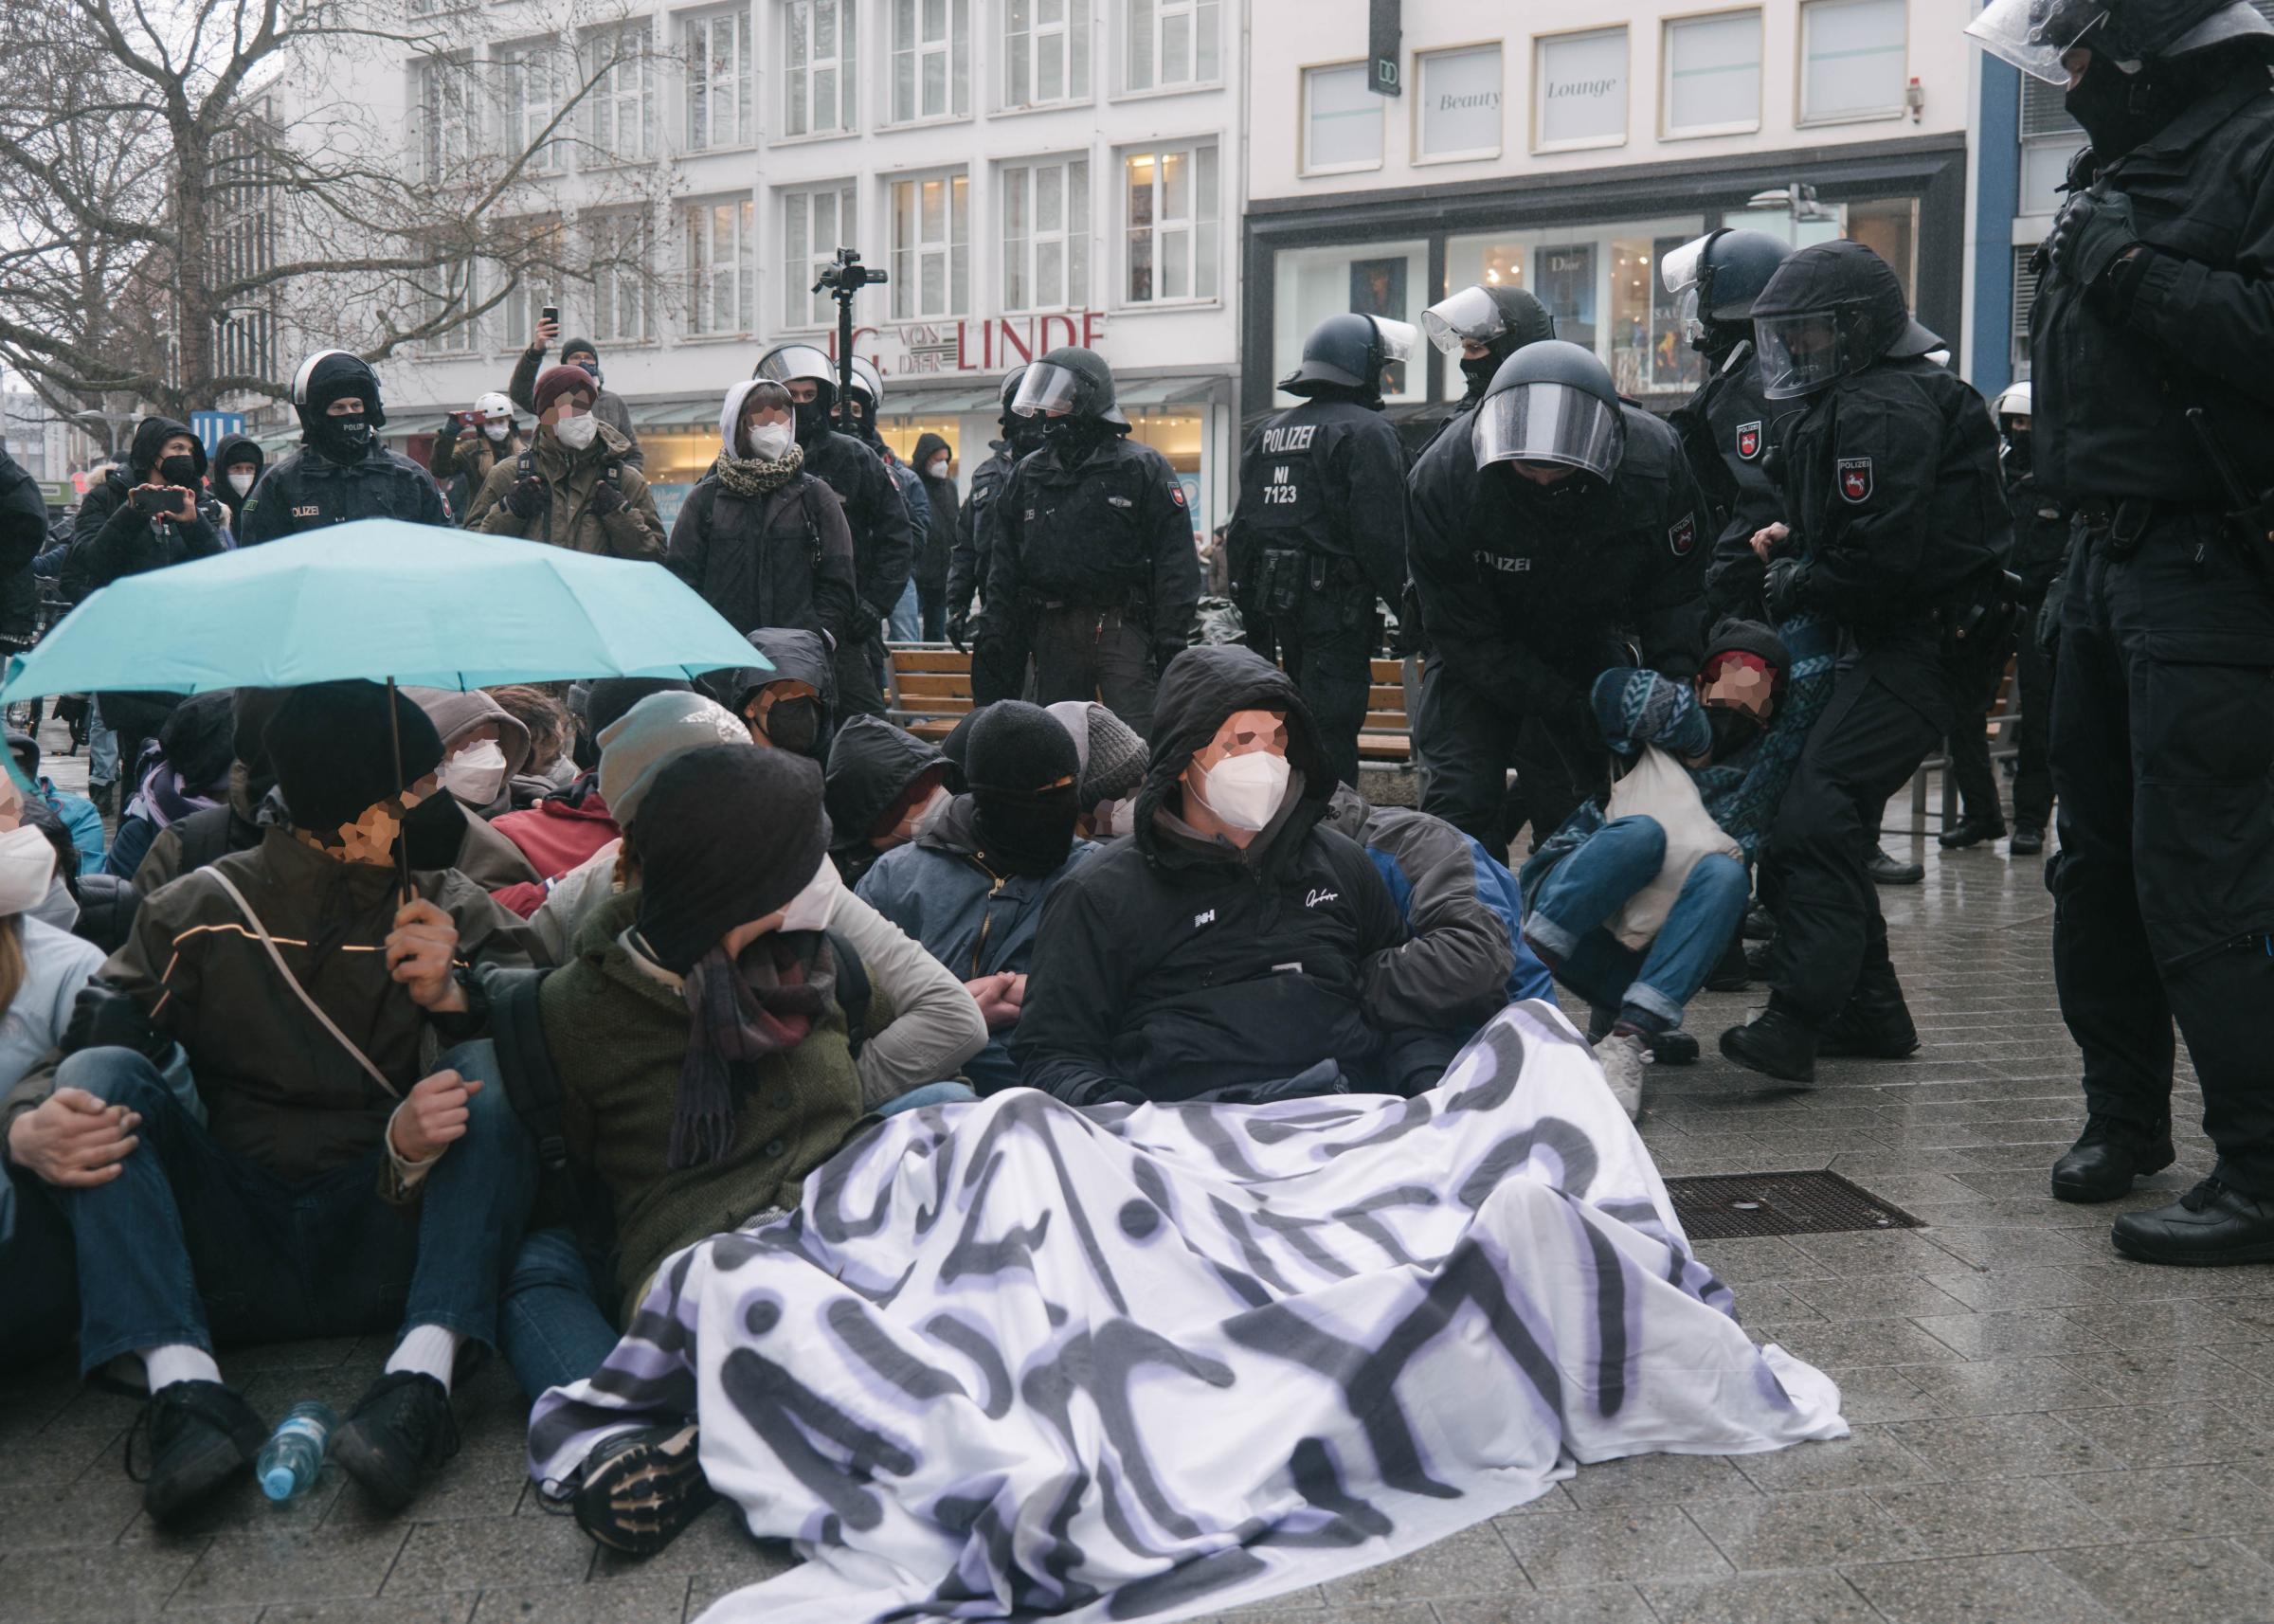 Antifascists block AfD march in Hannover - 